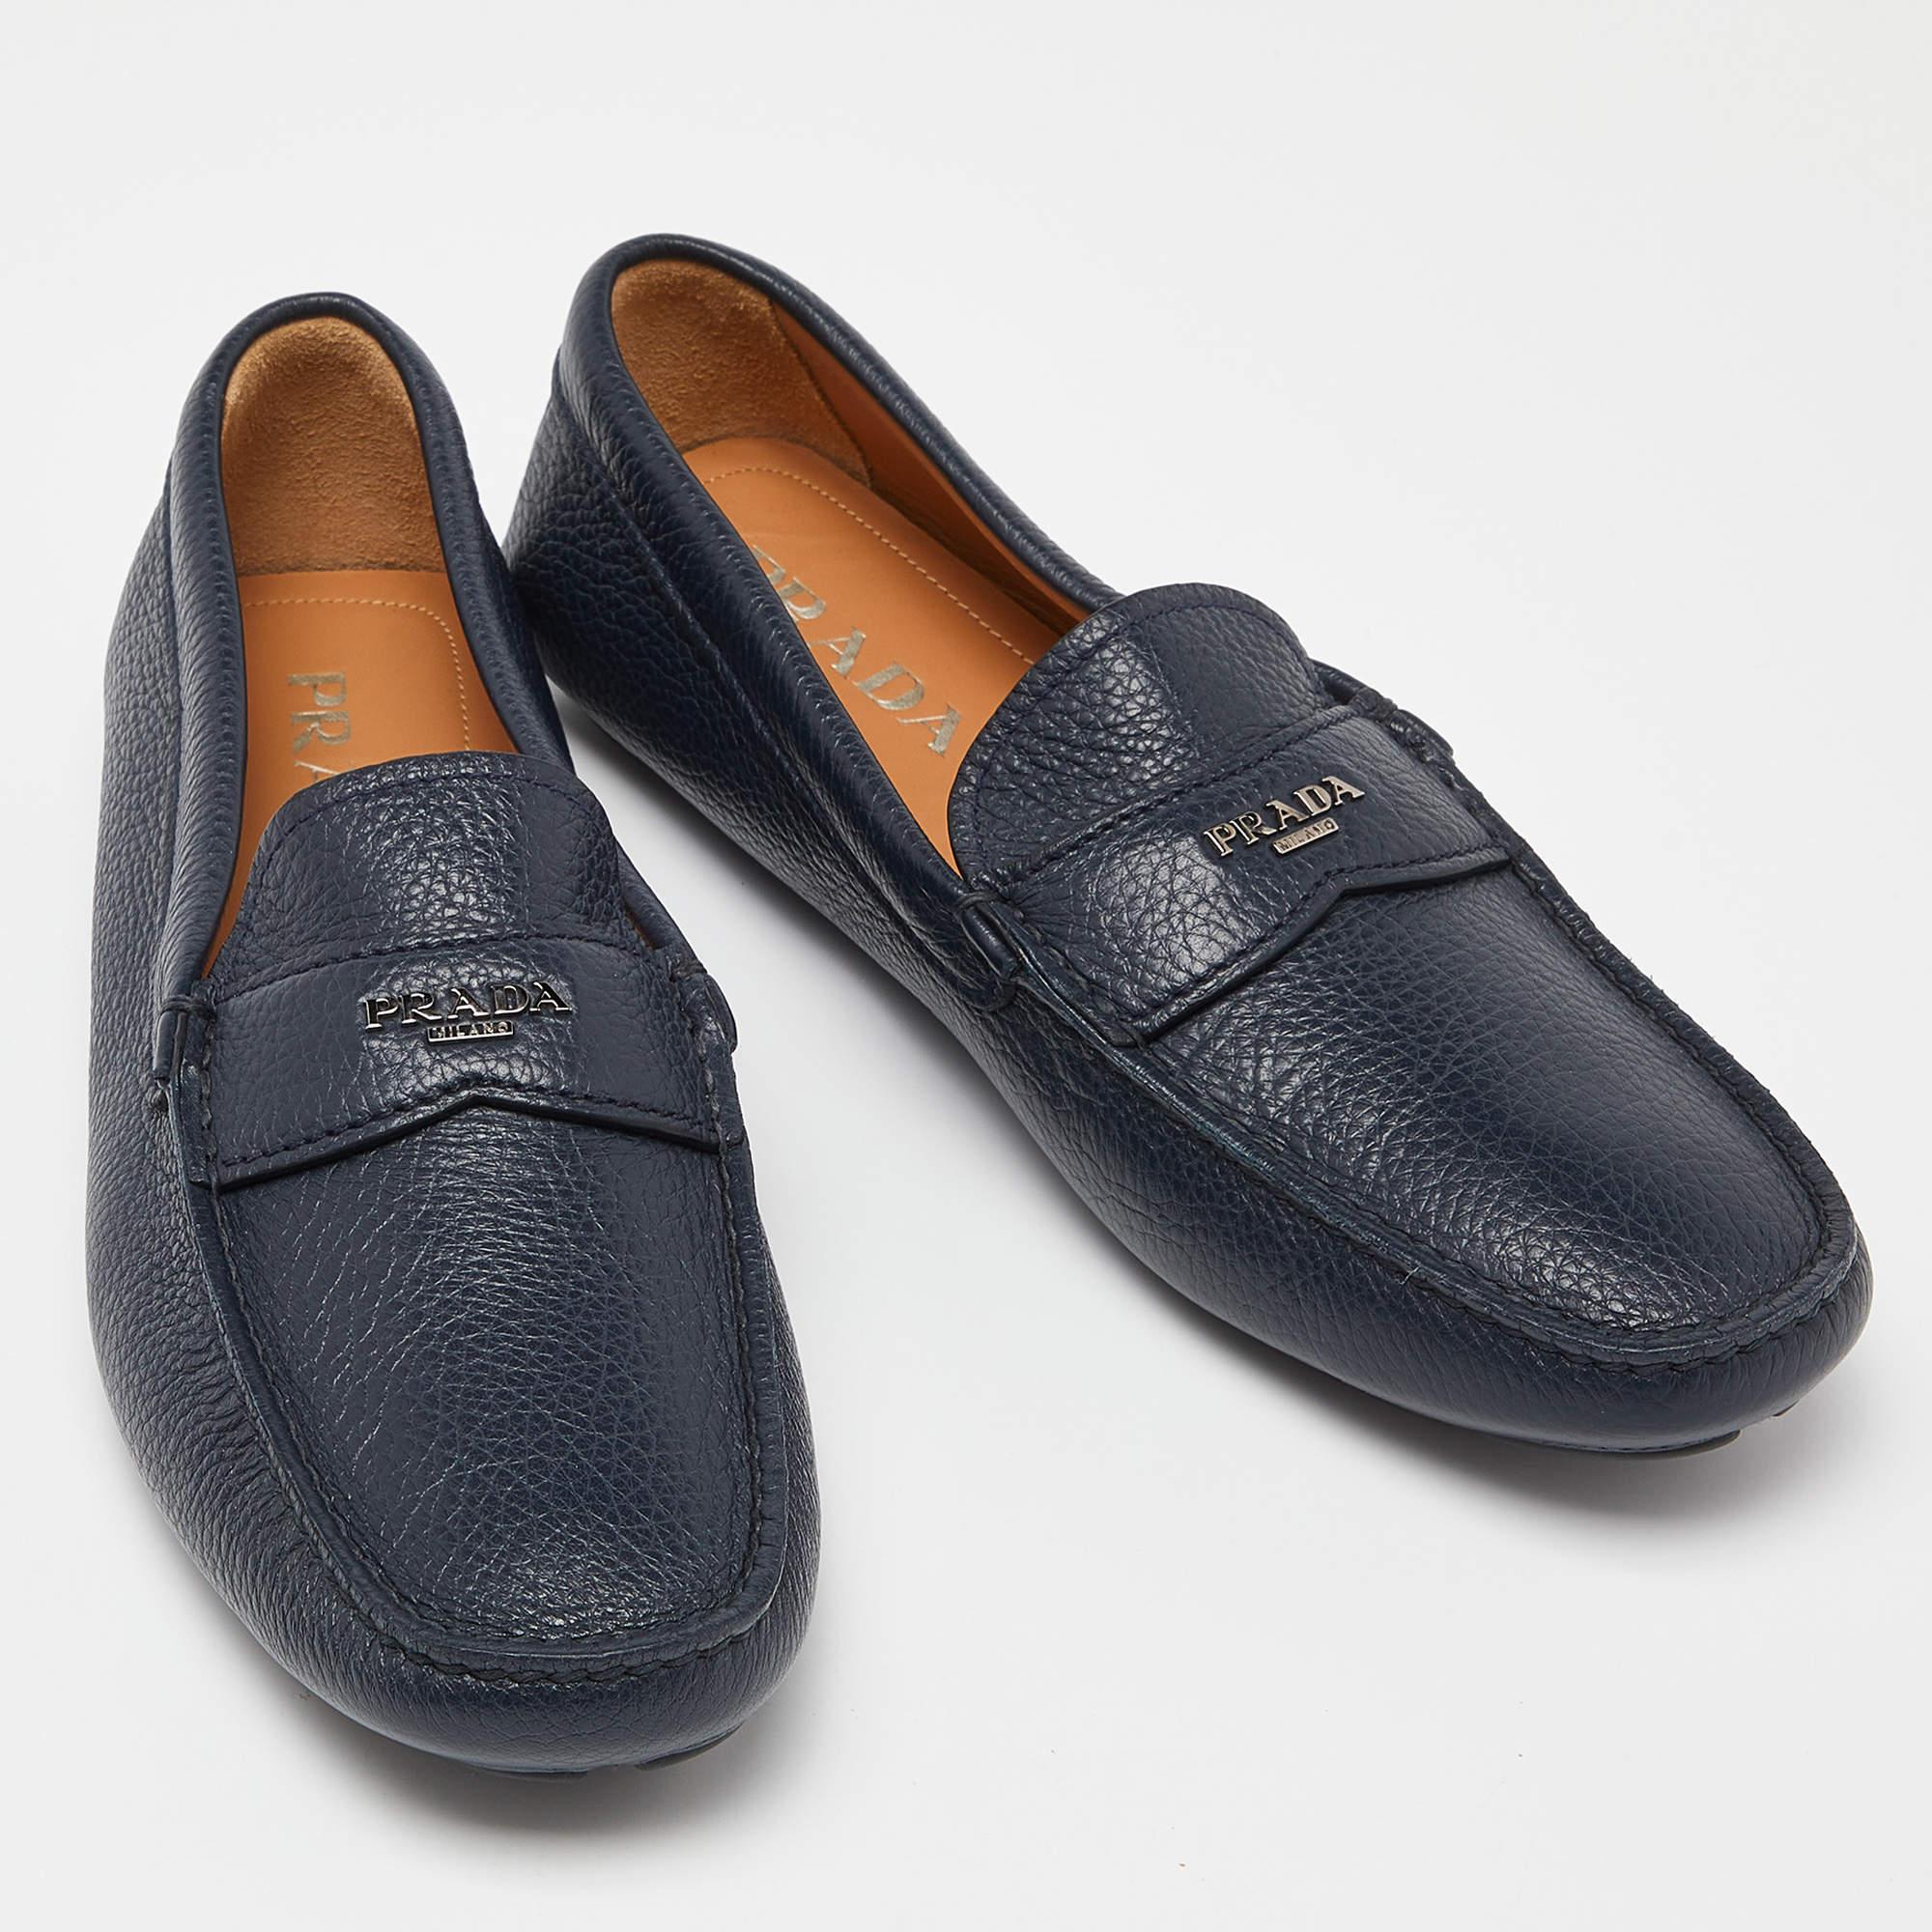 Prada Navy Blue Leather Penny Loafers Size 42.5 1